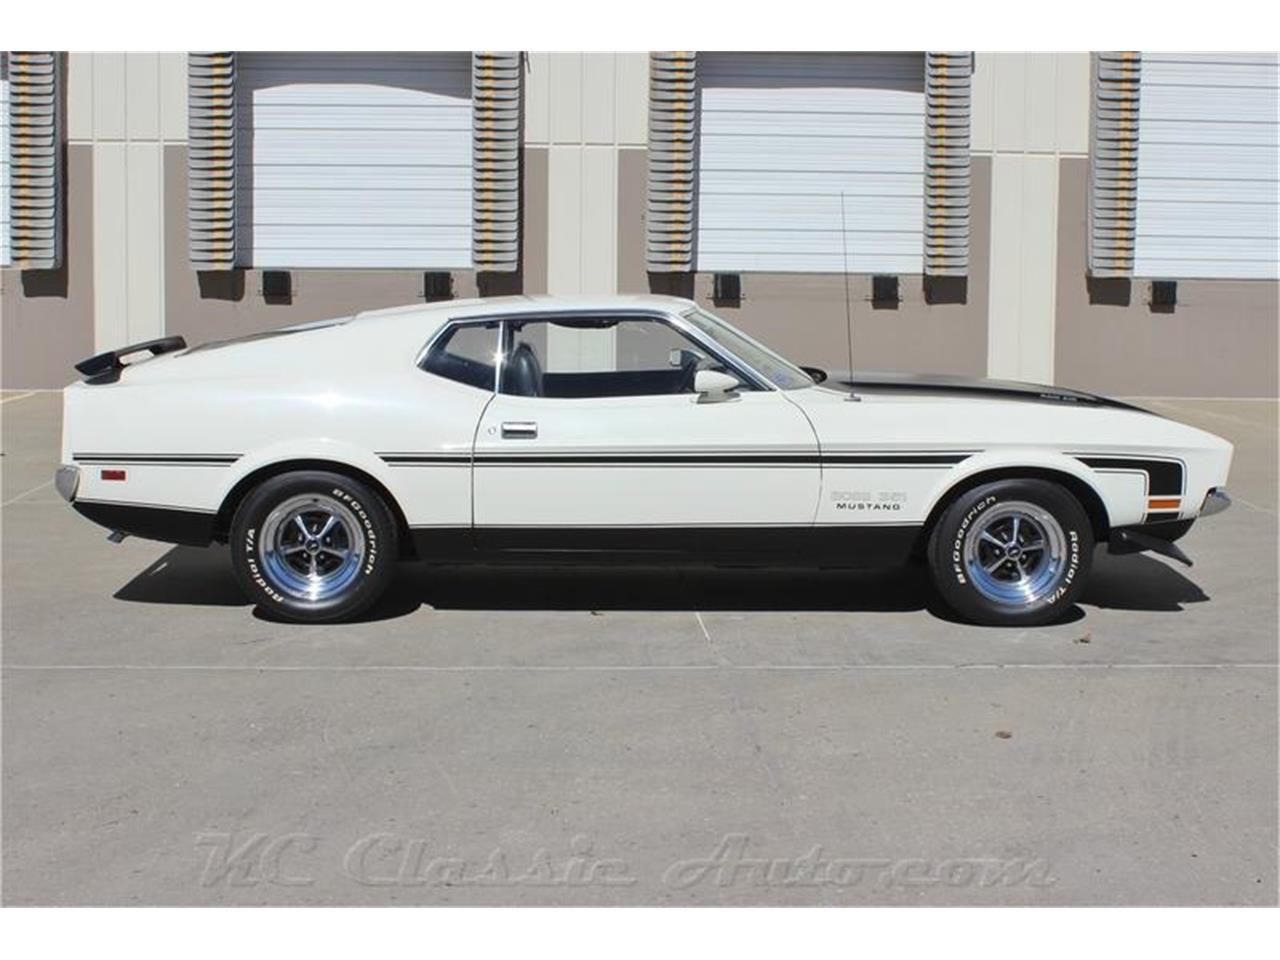 1971 Ford Mustang Mach1 Boss 351 Boss 351 for Sale | ClassicCars.com ...